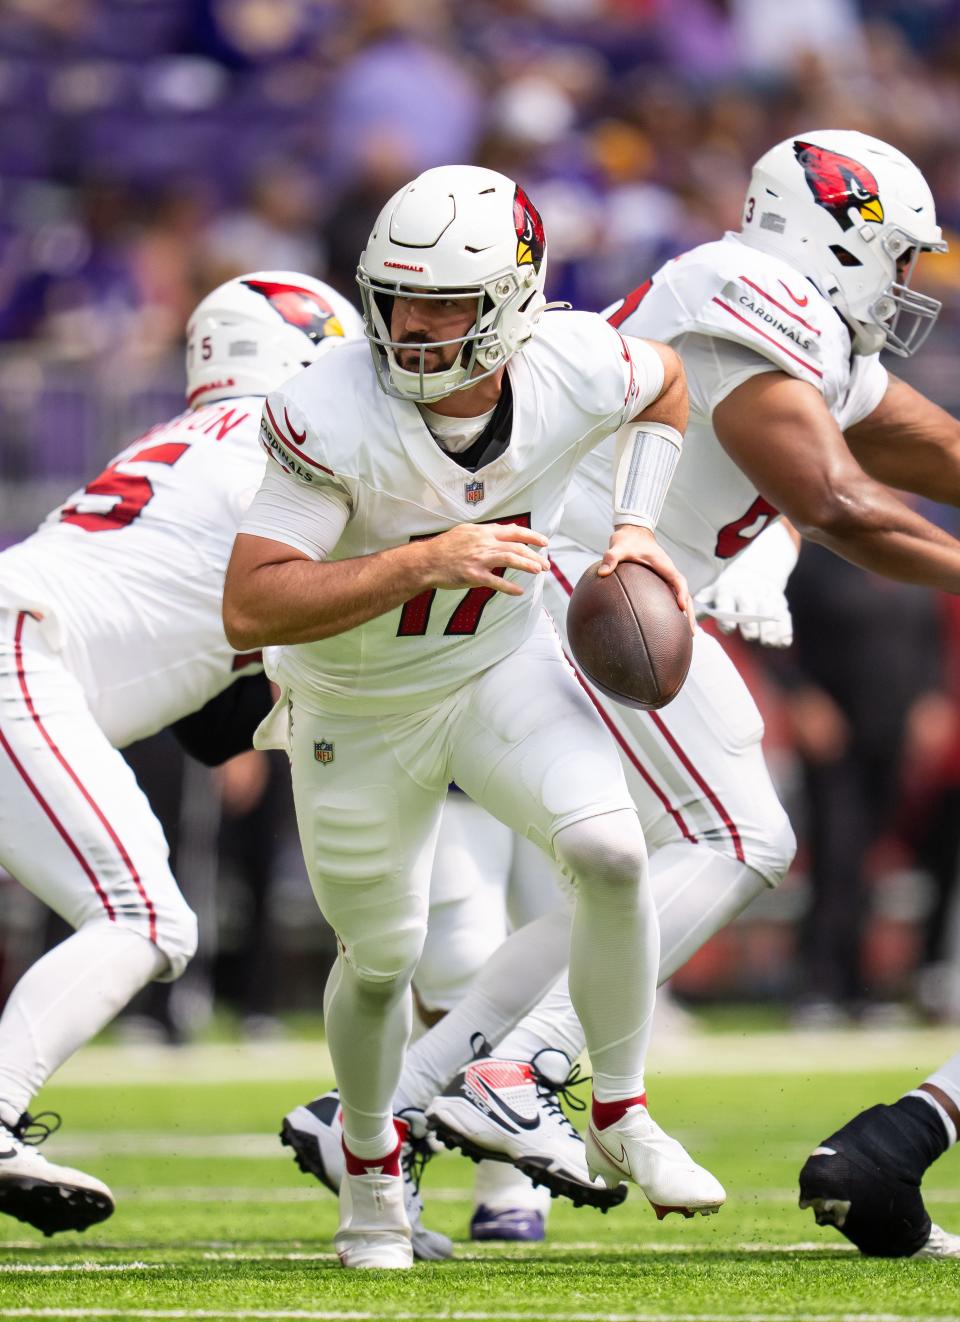 Do you like the Arizona Cardinals' new white uniform? They turned some heads in the team's final NFL preseason game.